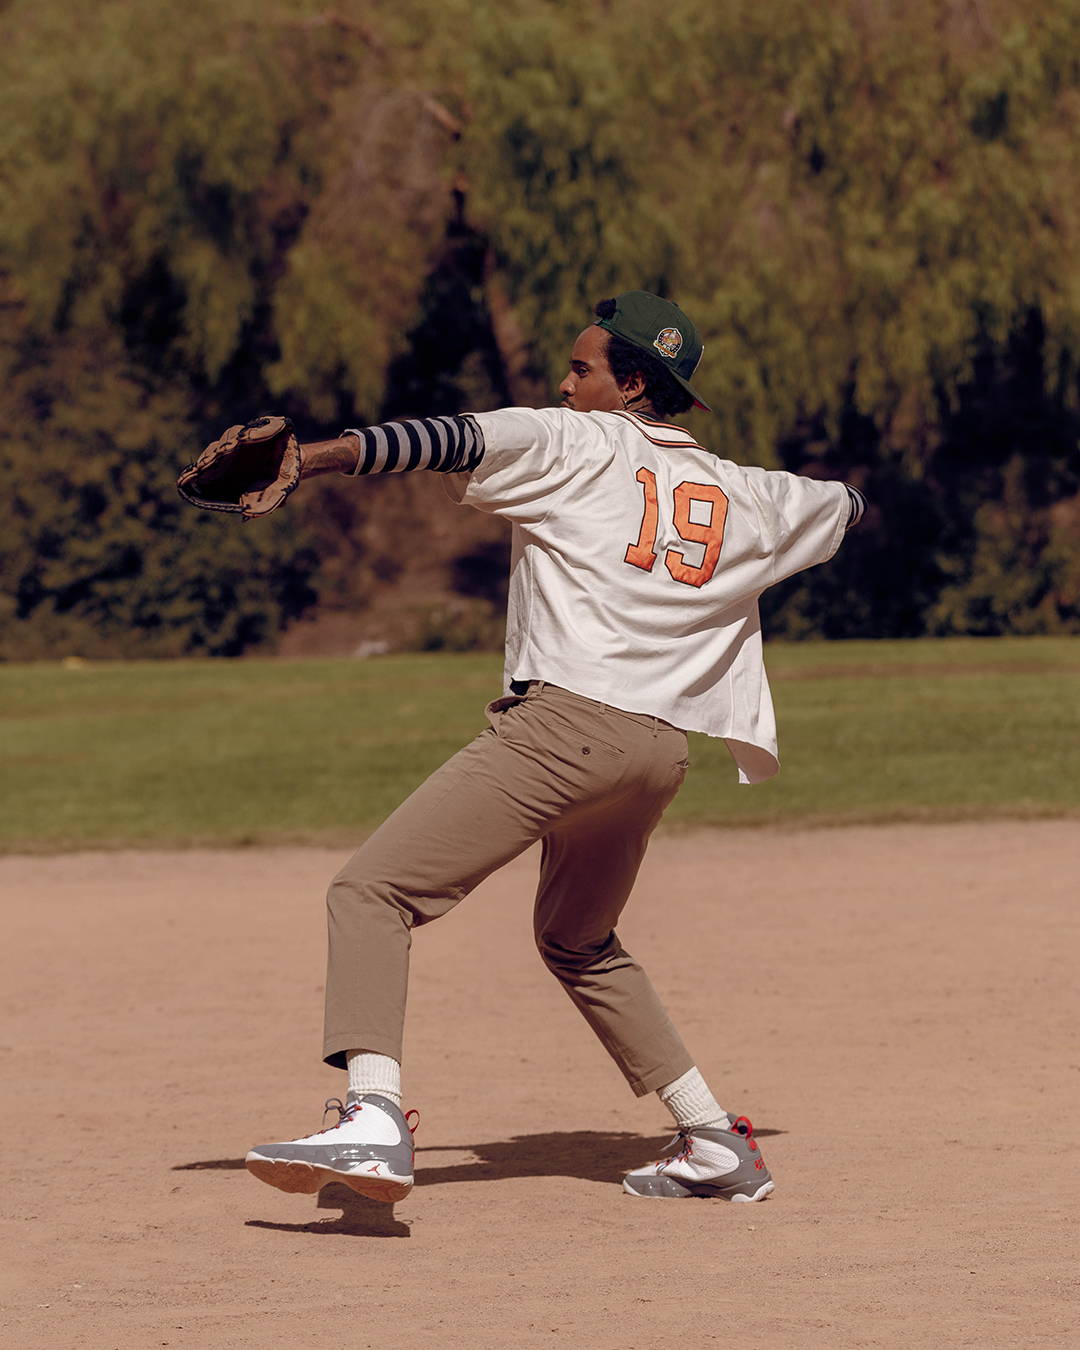 male model winding up to pitch in aj9 retro fire red